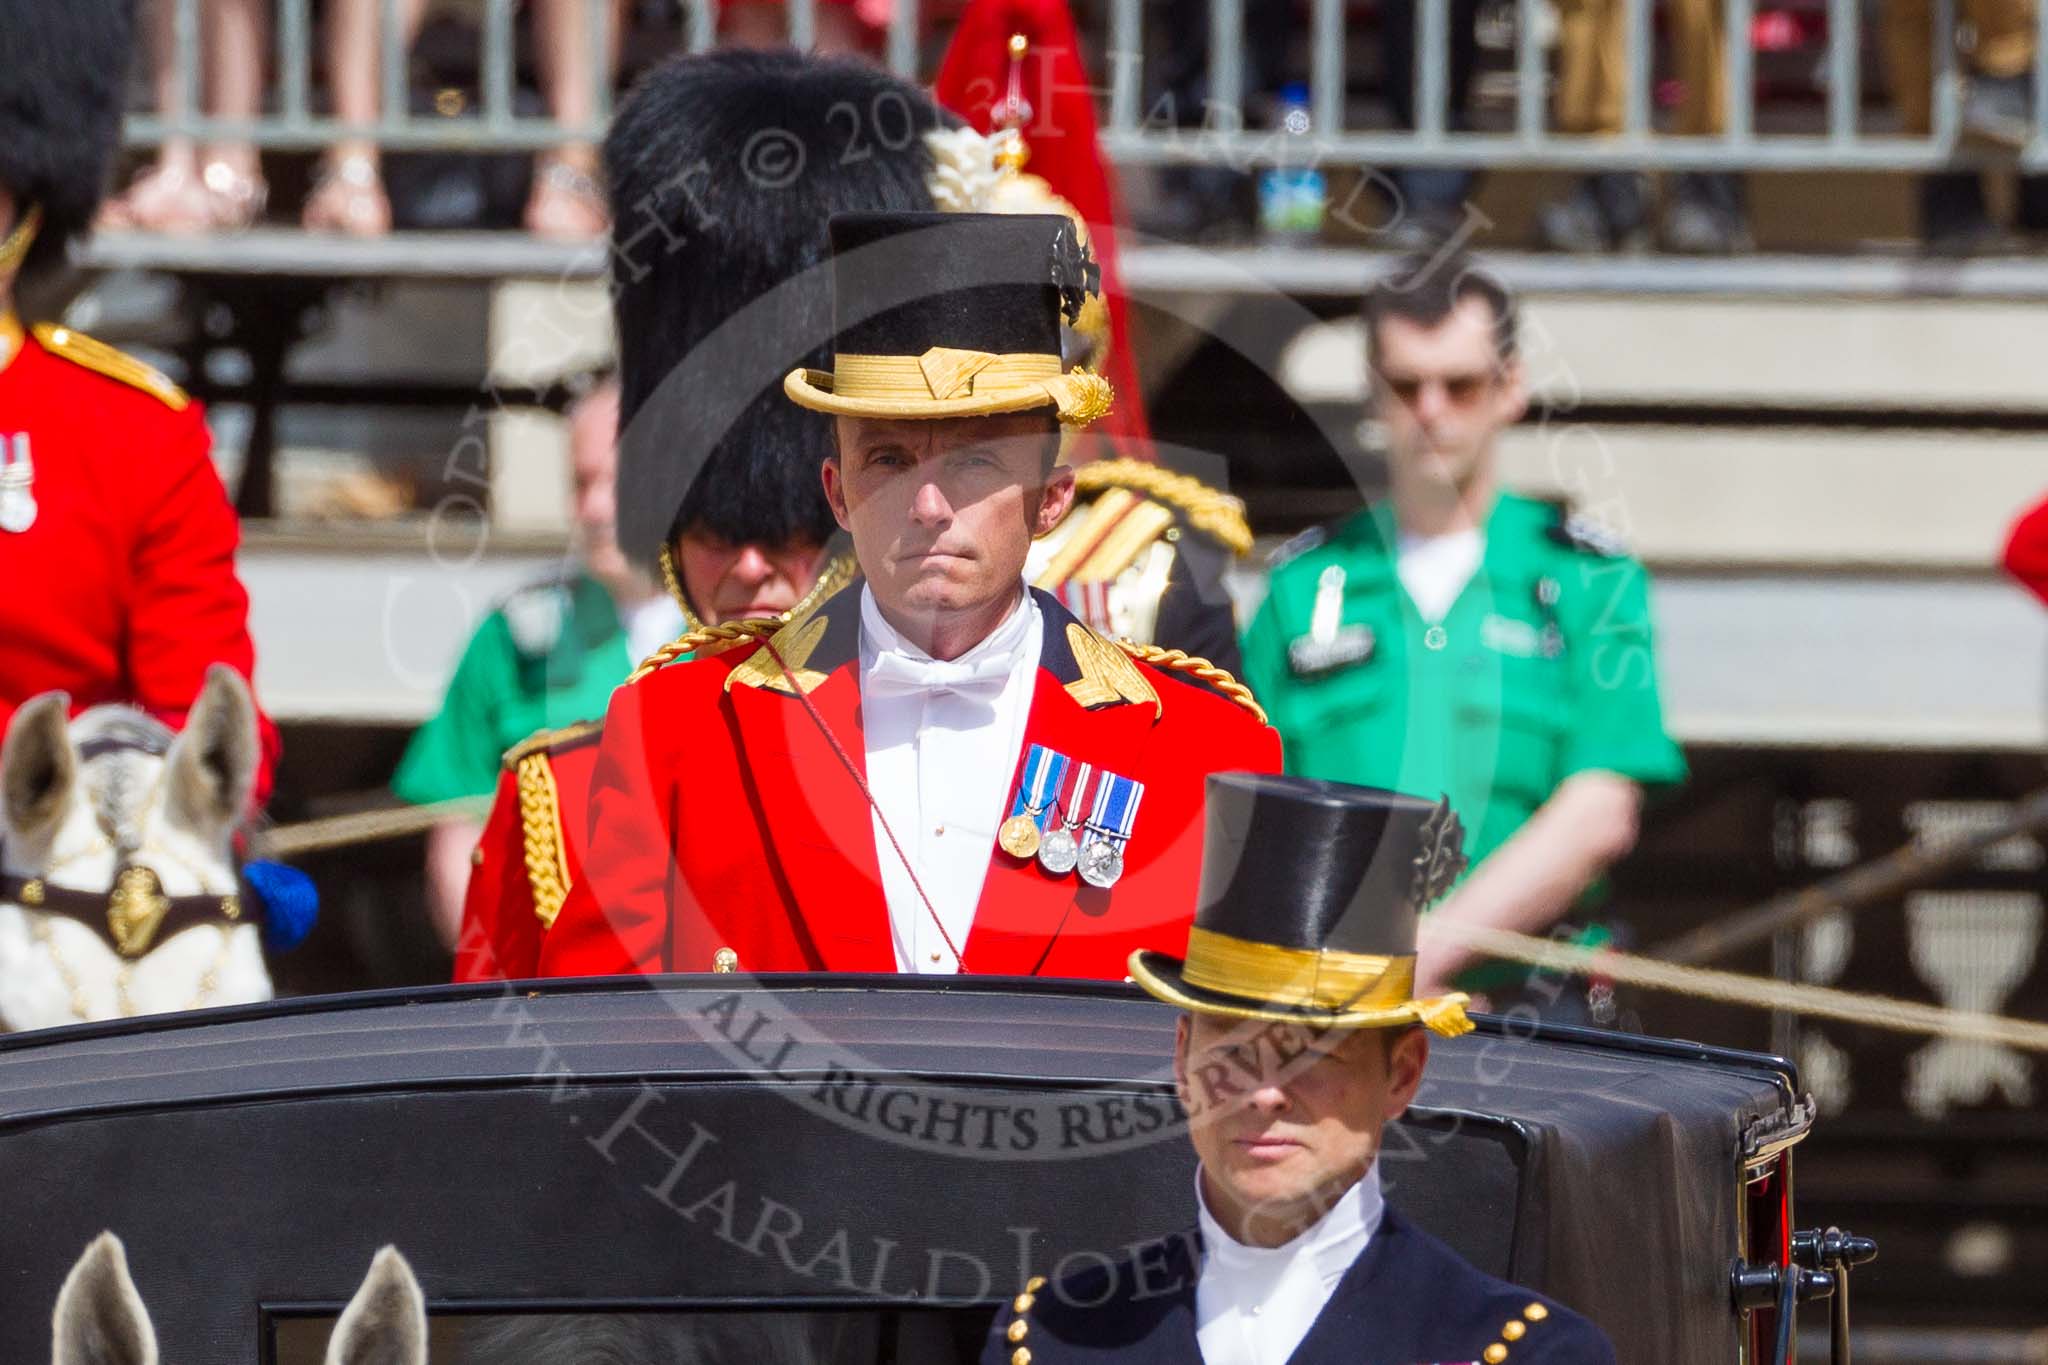 The Colonel's Review 2015.
Horse Guards Parade, Westminster,
London,

United Kingdom,
on 06 June 2015 at 10:59, image #189